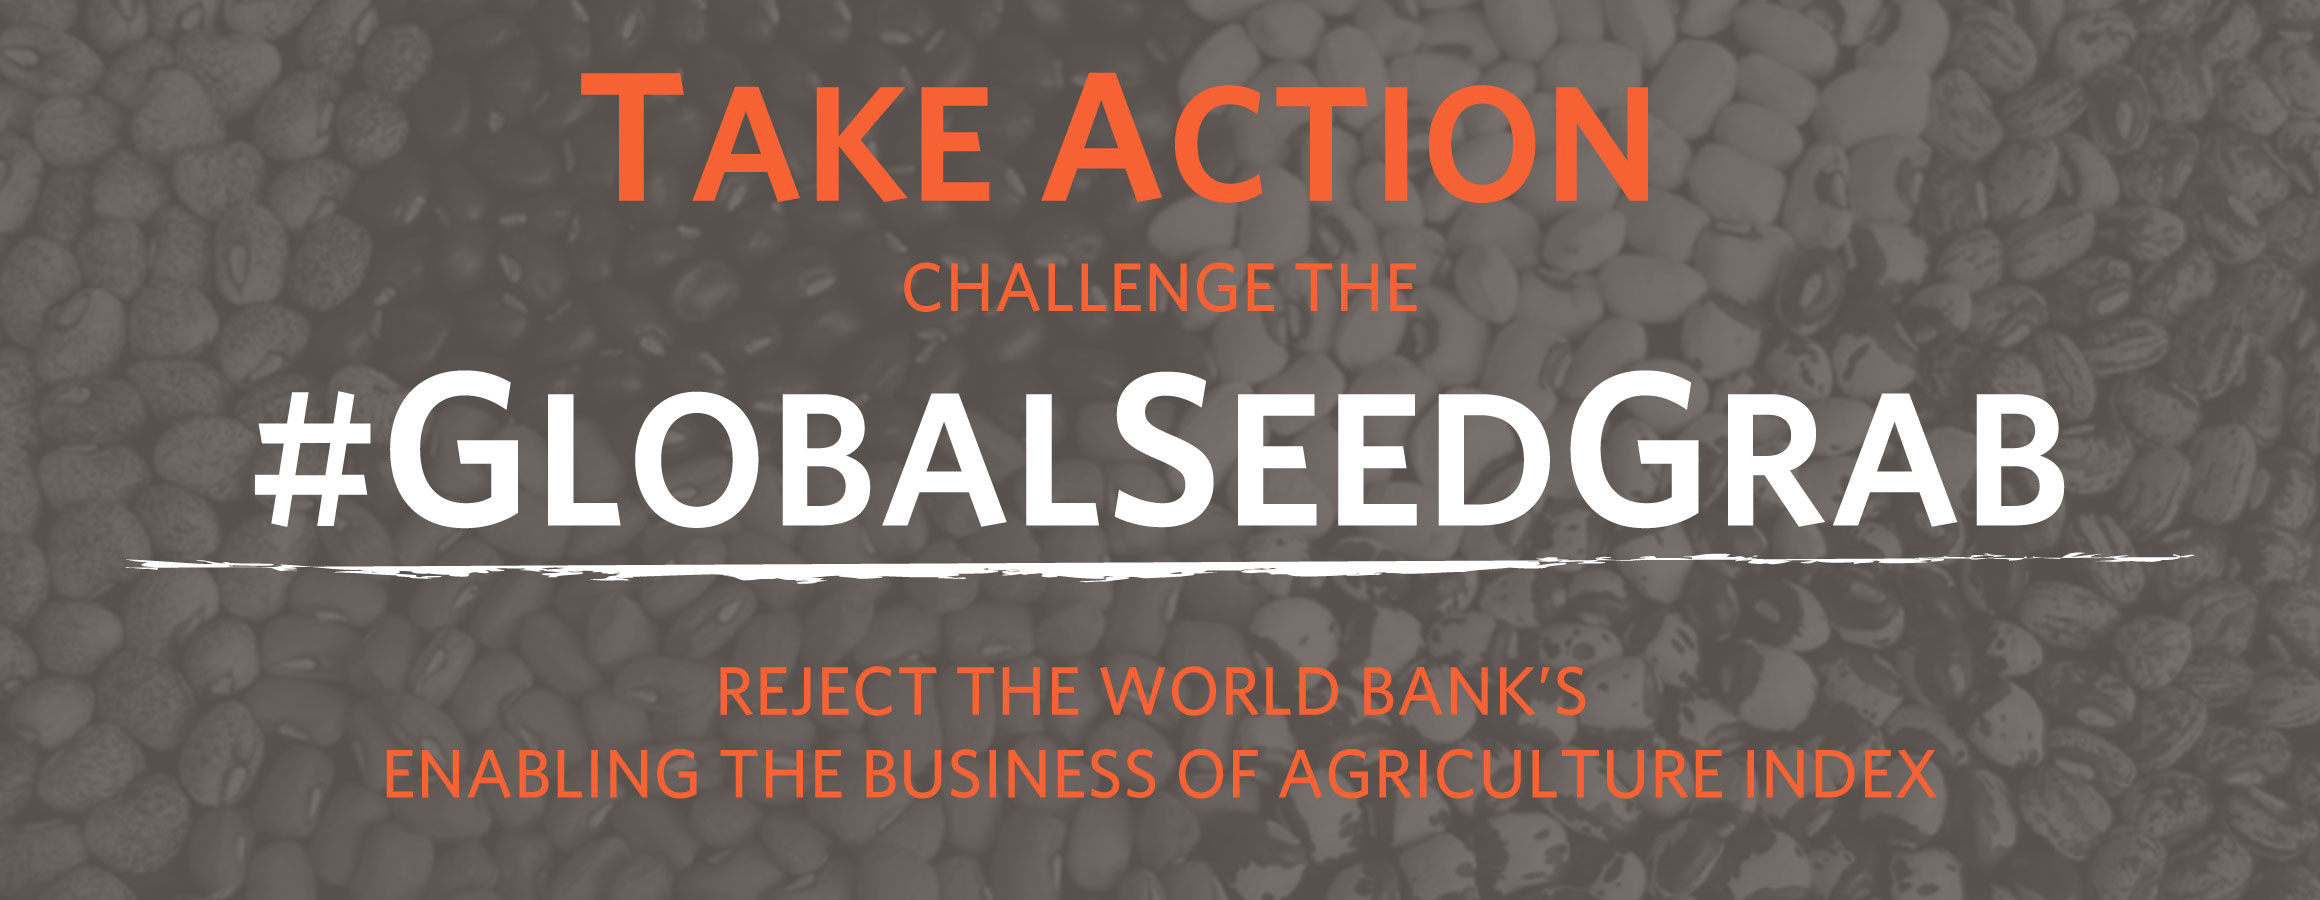 Fight the Enabling the Business of Agriculture Supported #GLOBALSEEDGRAB